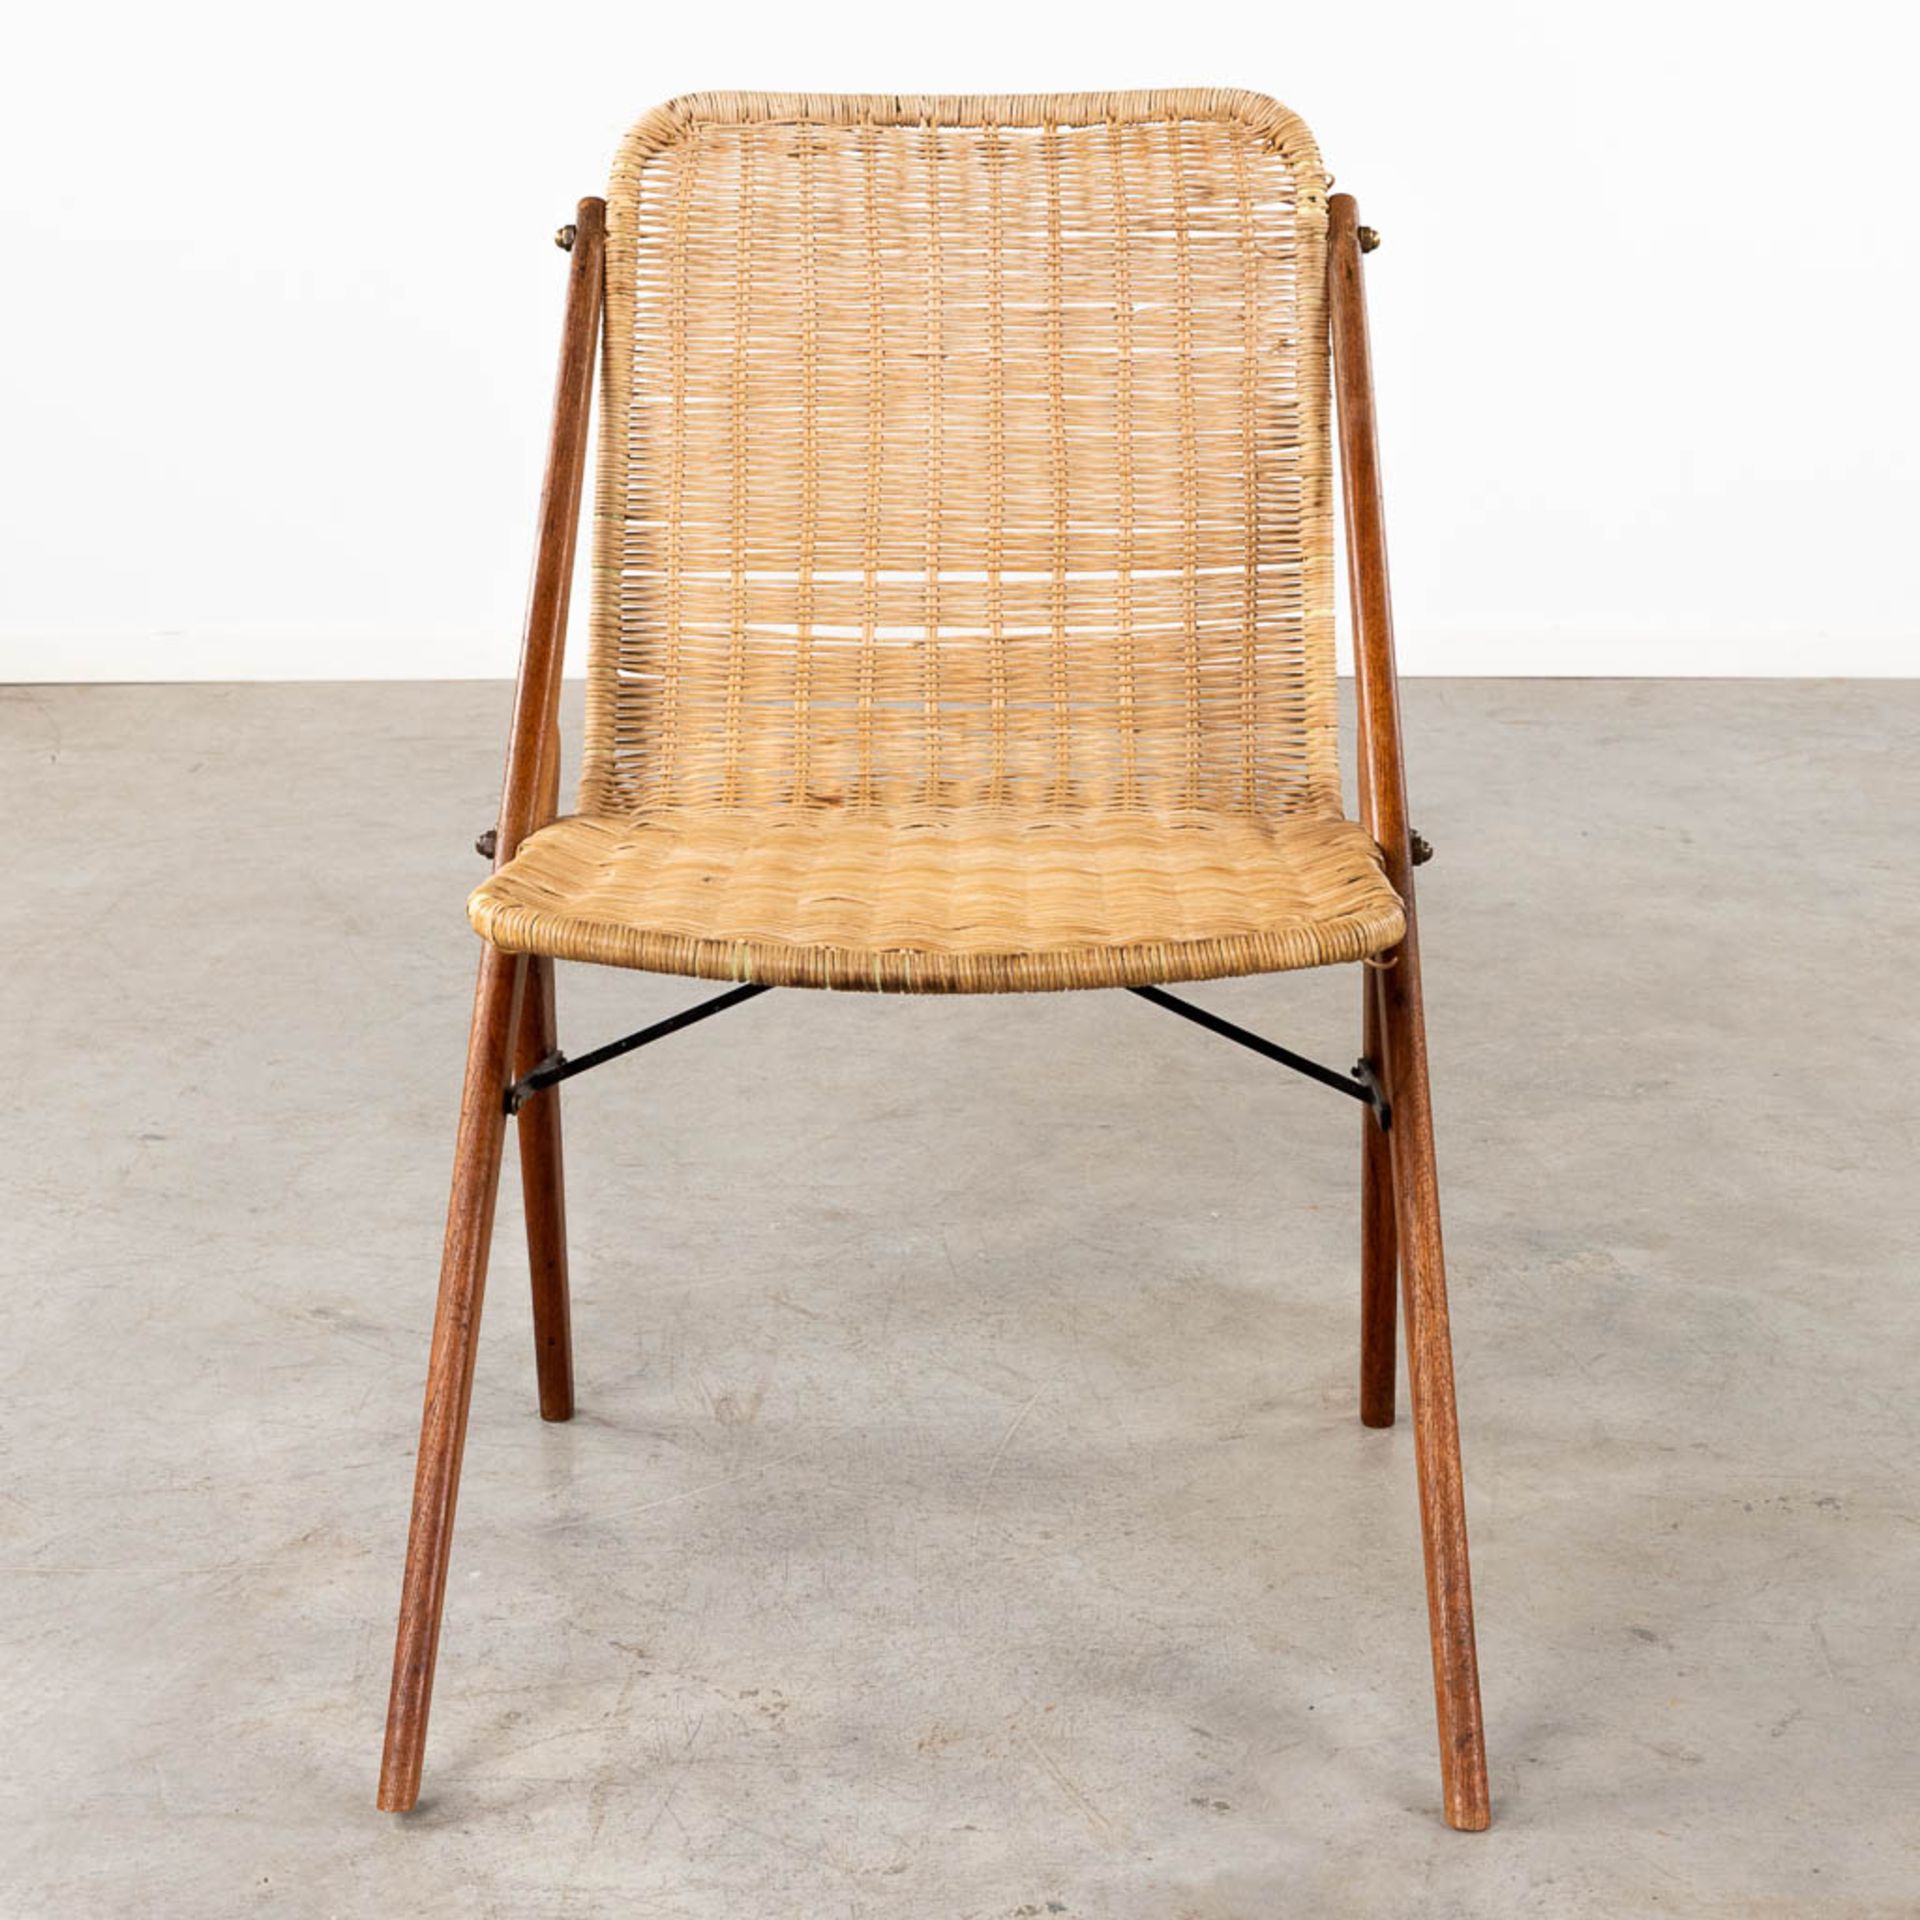 A mid-century table and 6 chairs, rotan and metal, teak wood. Circa 1960. (D:86 x W:160 x H:76 cm) - Image 27 of 31